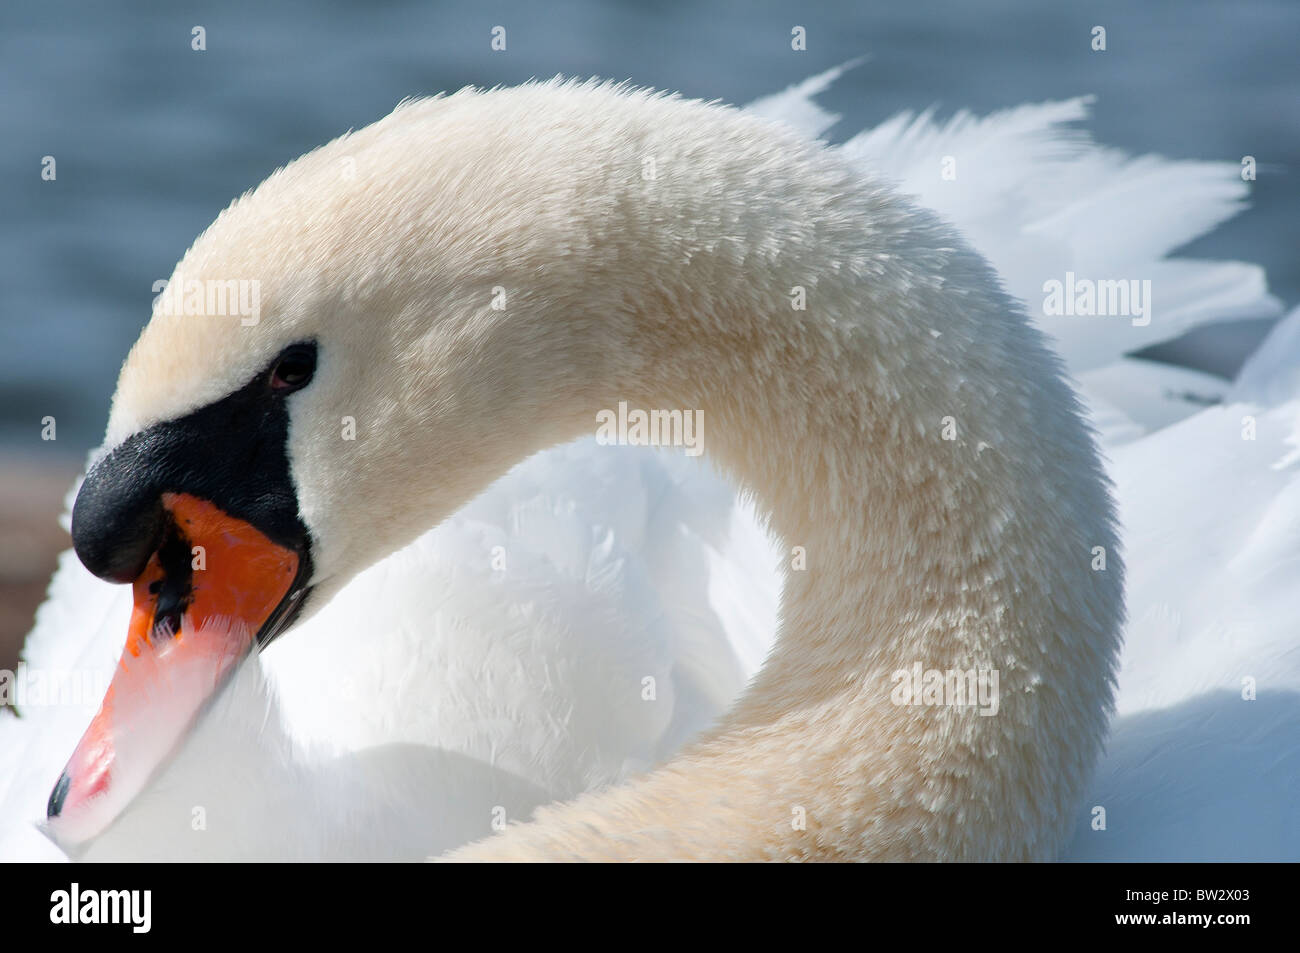 A shy looking mute swan Stock Photo